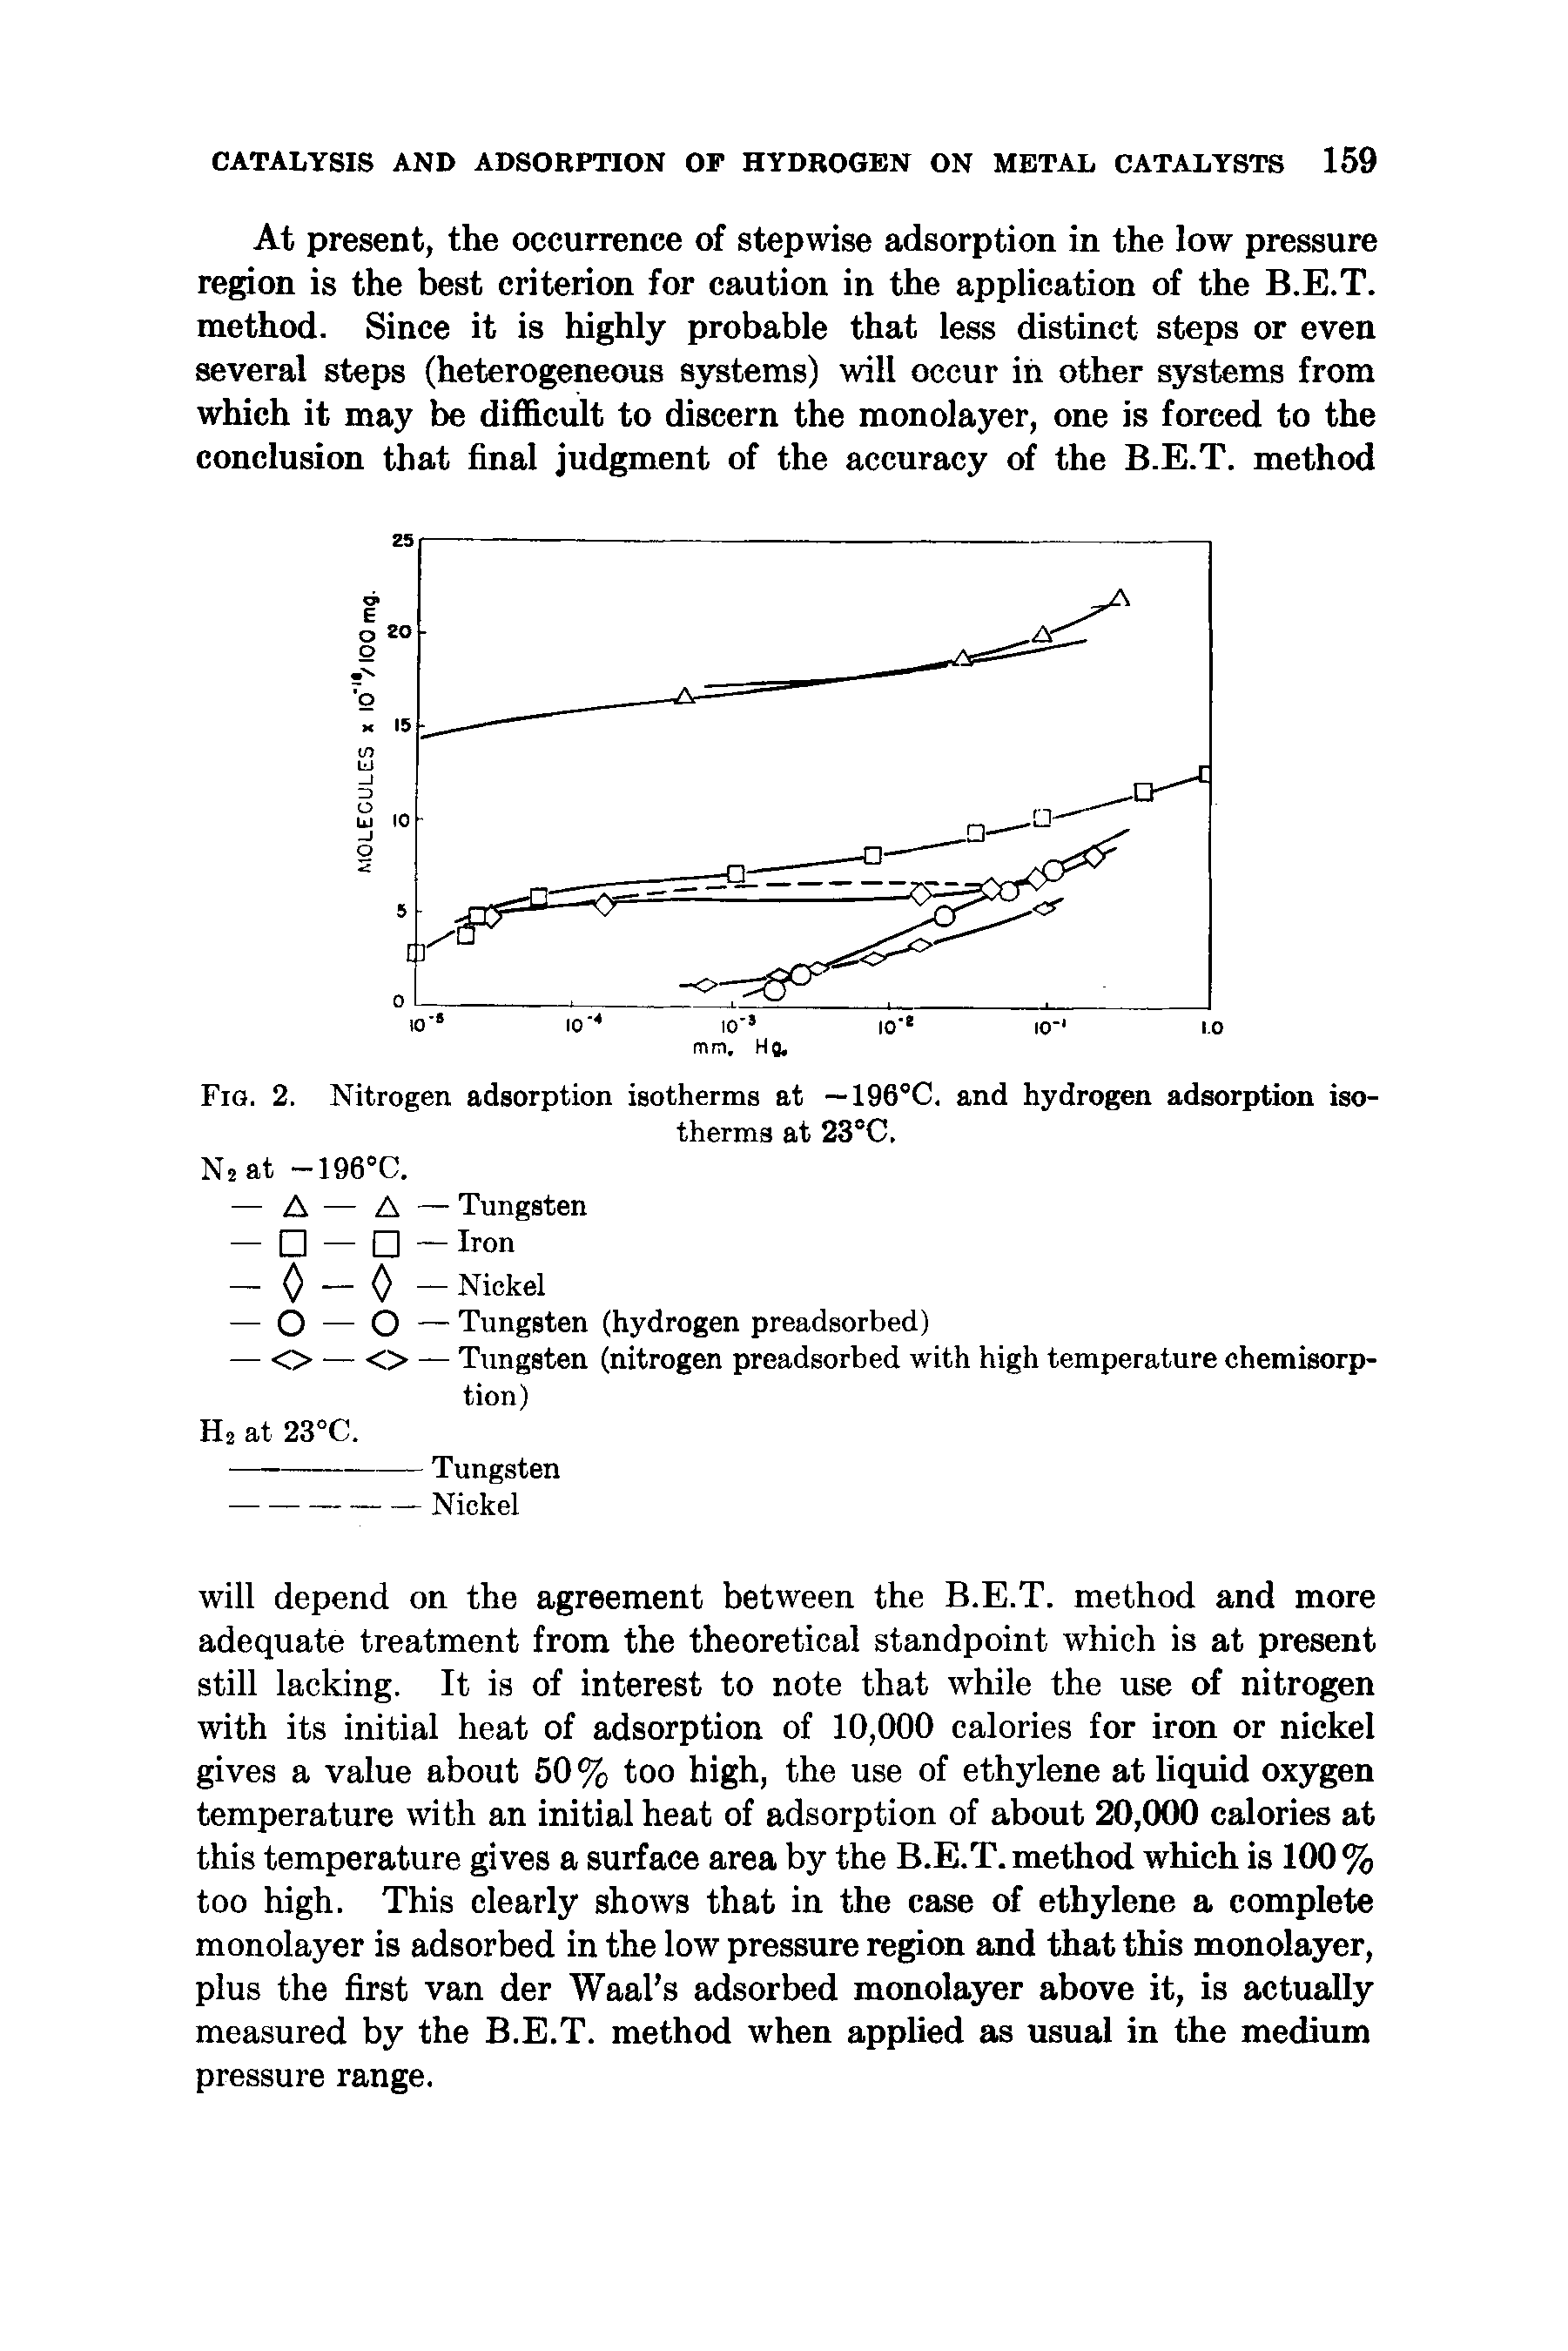 Fig. 2. Nitrogen adsorption isotherms at —196°C. and hydrogen adsorption isotherms at 23°C.